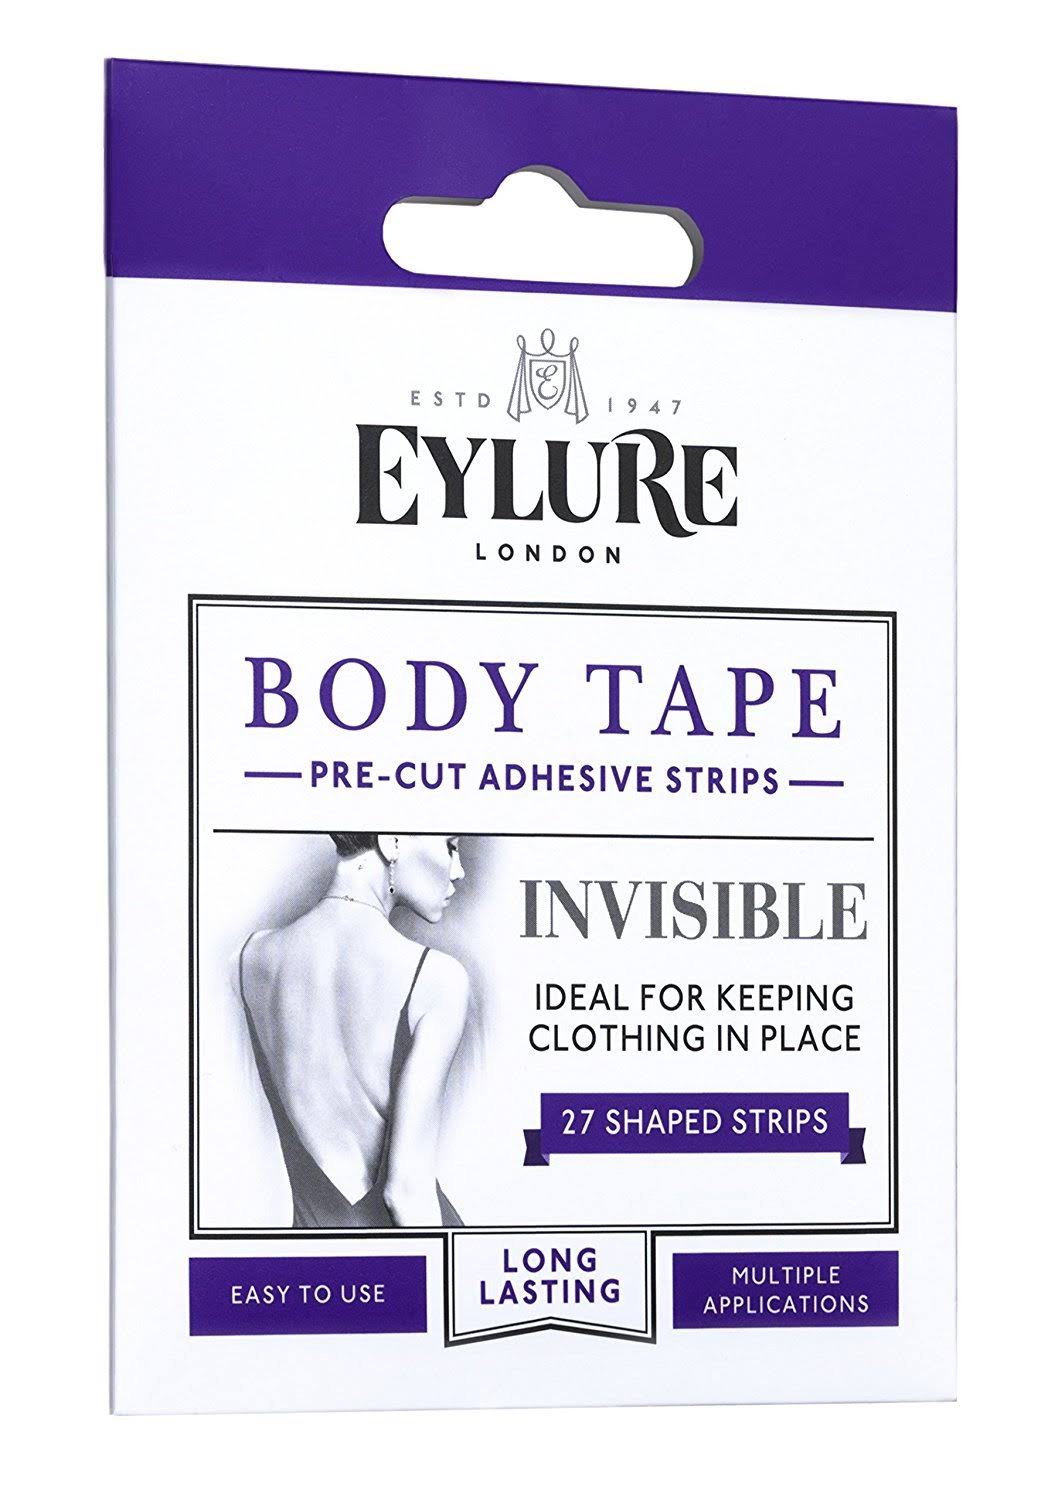 Eylure Body Tape - Invisible, 27 Shaped Strips